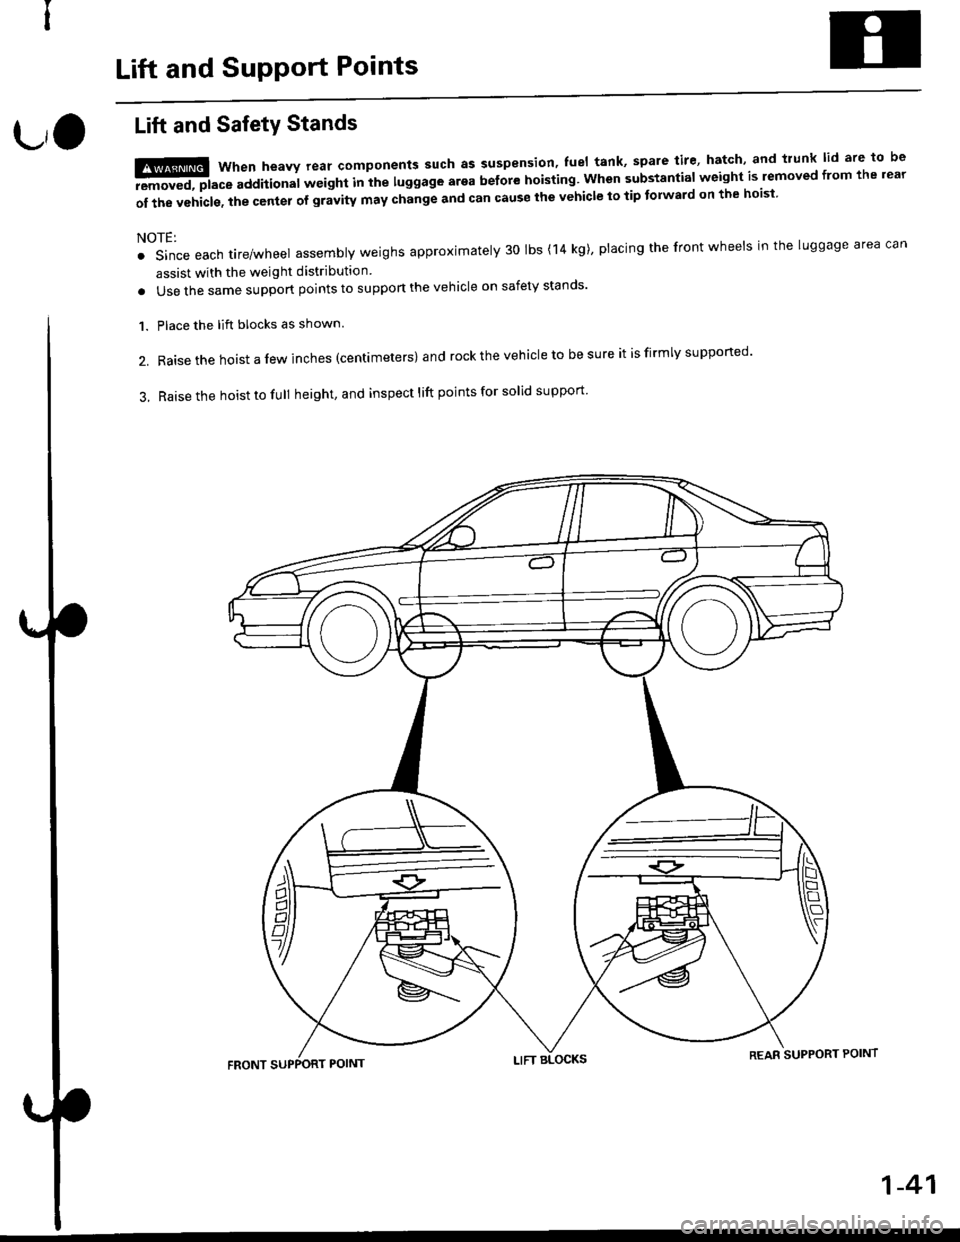 HONDA CIVIC 1997 6.G Service Manual Lift and SupPort Points
L,O
Lift and SafetY Stands
t!ffi when heavv rear components such as suspension fuel tank spare tire hatch and trunk lid are to be
-aEremoved, place additional wetght Inihe 